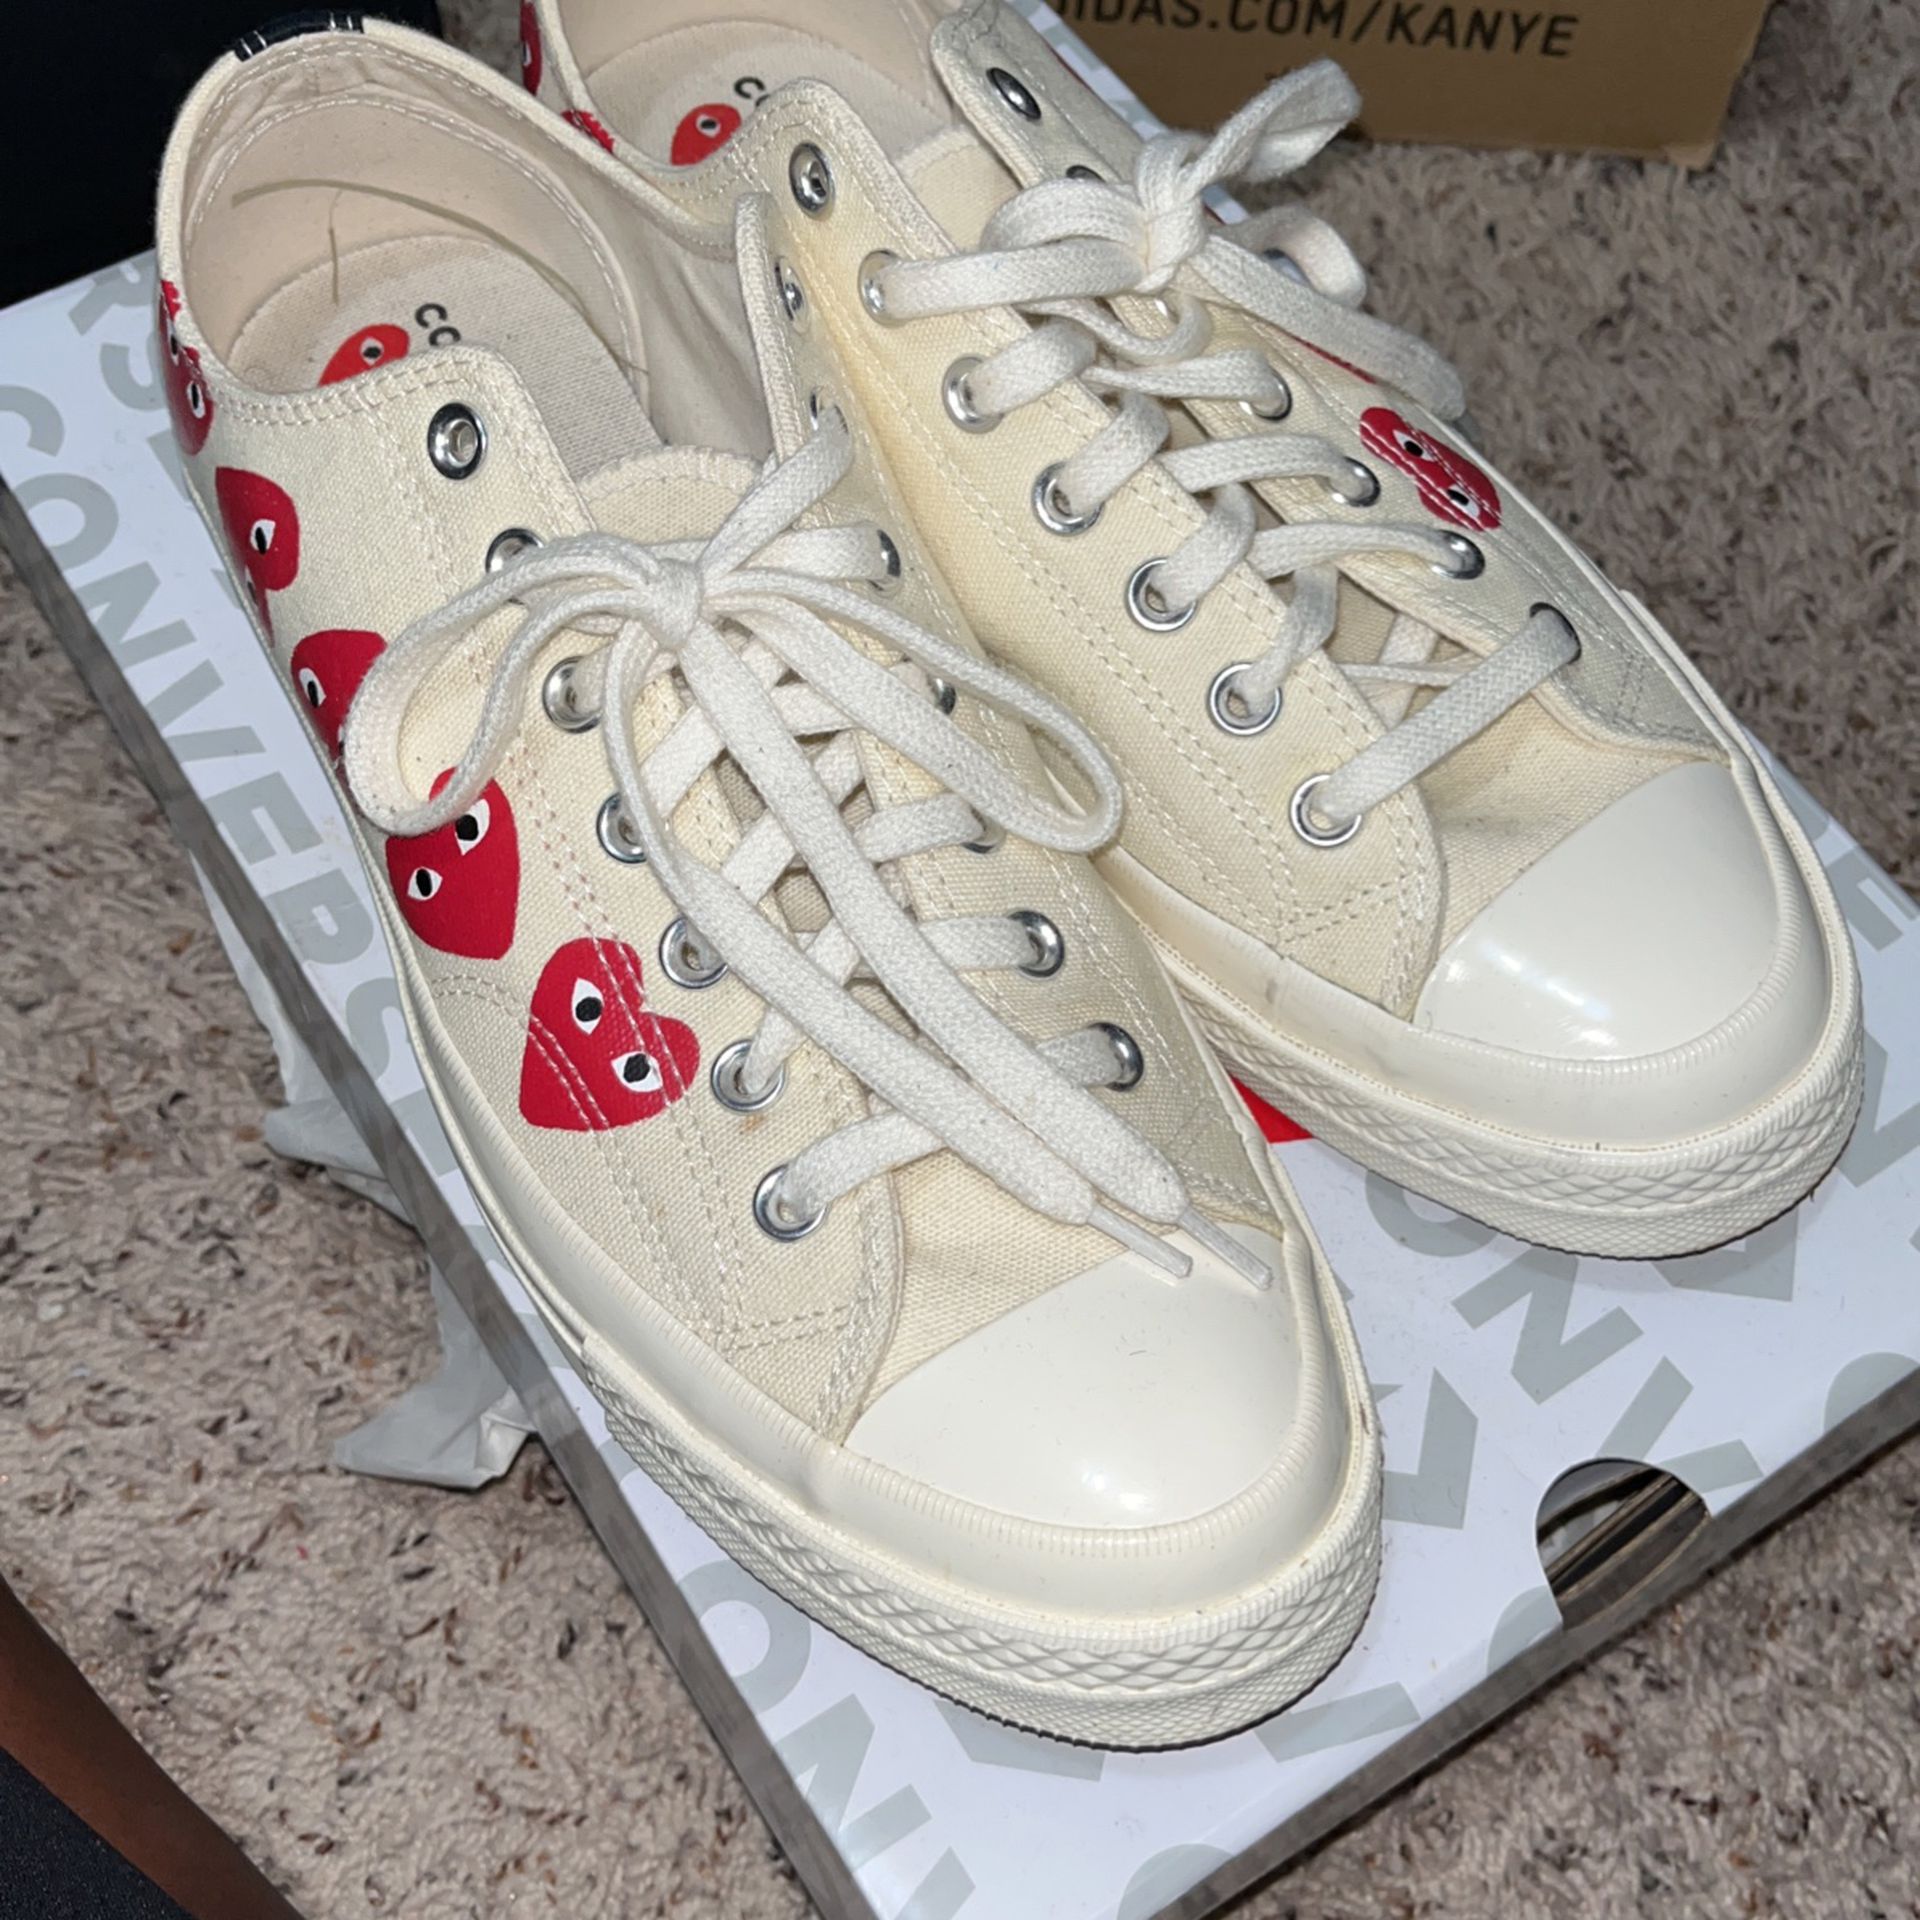 Cdg Converse 10 Sale in Spring, TX OfferUp